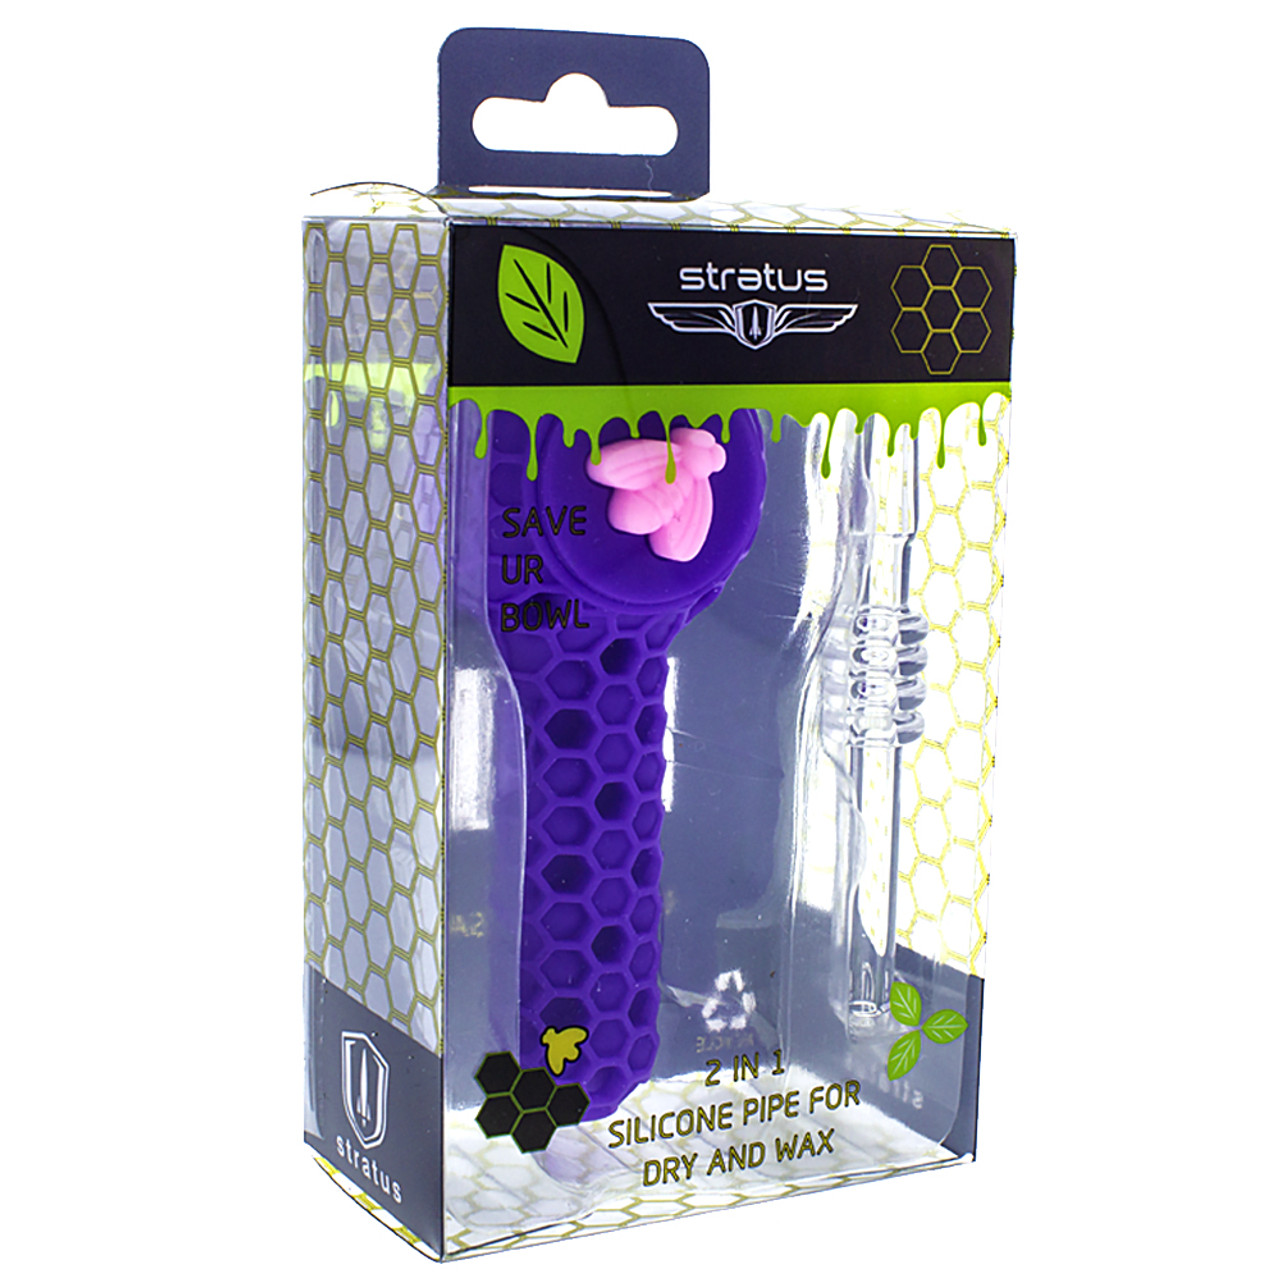 Stratus - 2 in 1 Honey Dab Straw and Silicone Hand Pipe - Purple